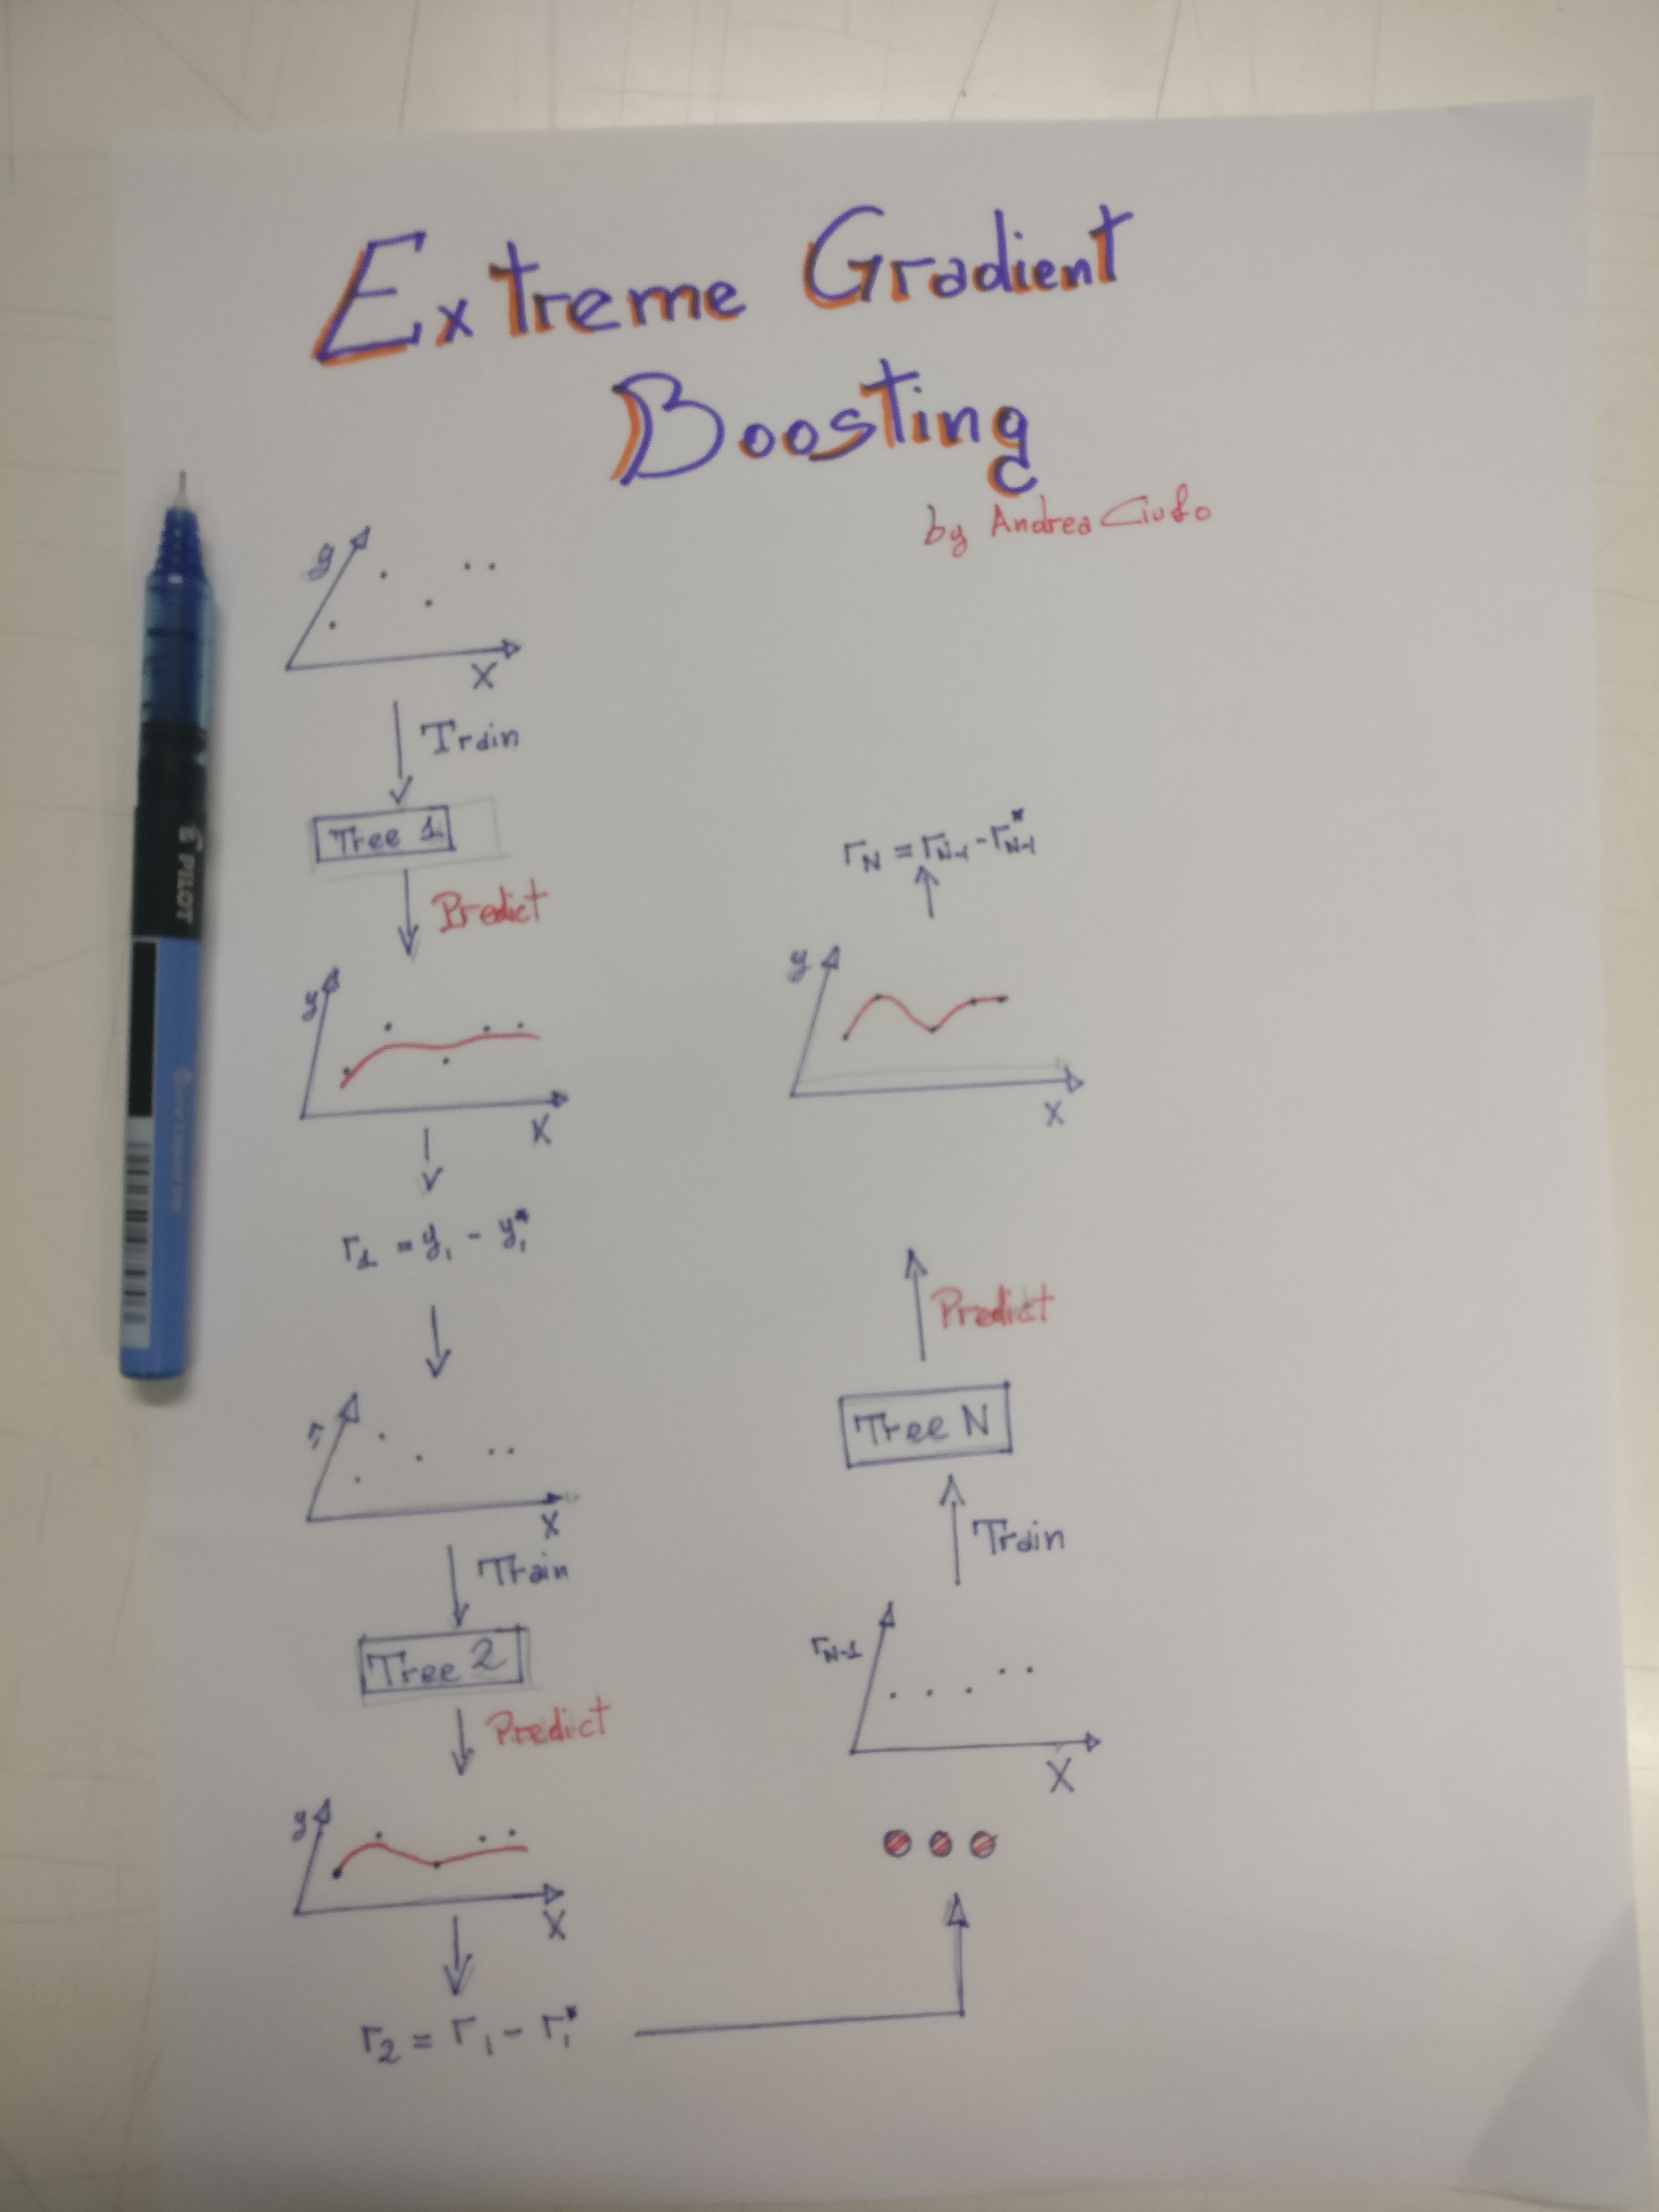 Extreme Gradient Boosting Algorith Explained in his steps until convergence